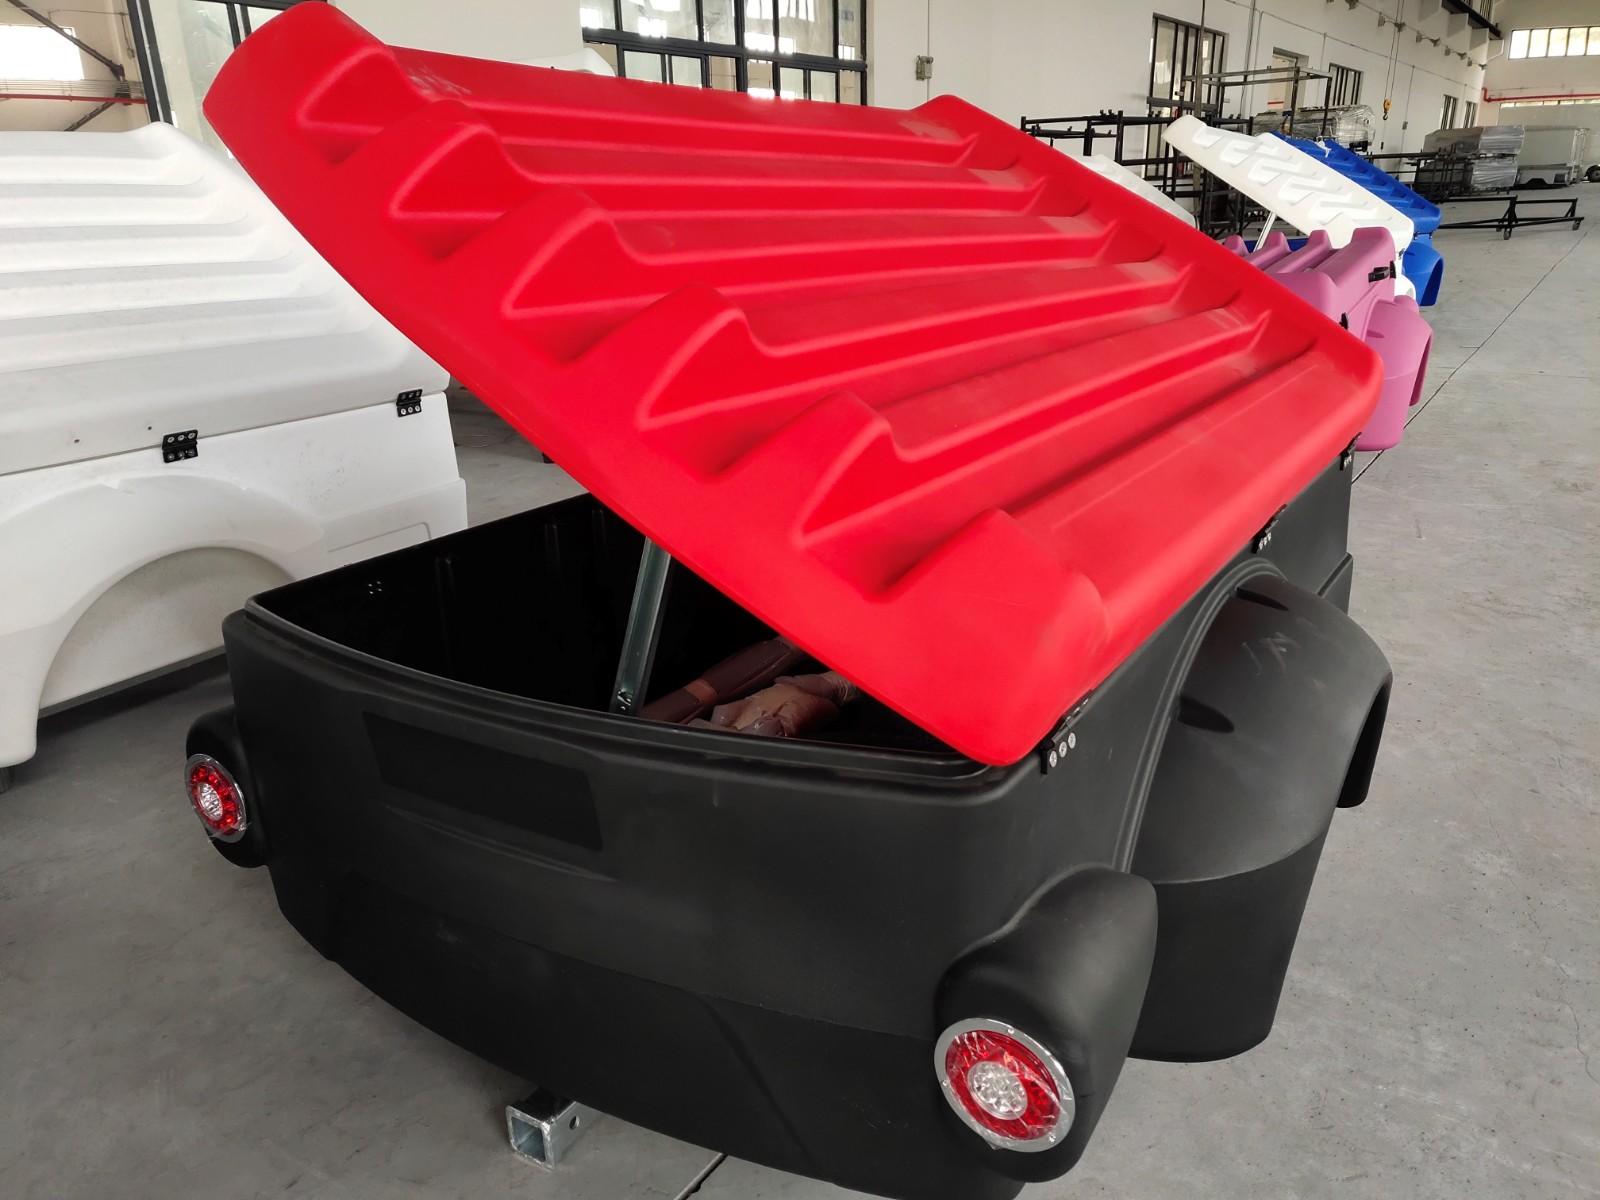 Waterproof plastic trailers for camping,Luggage,Touring, LLDPE Trailer. XL-950-1